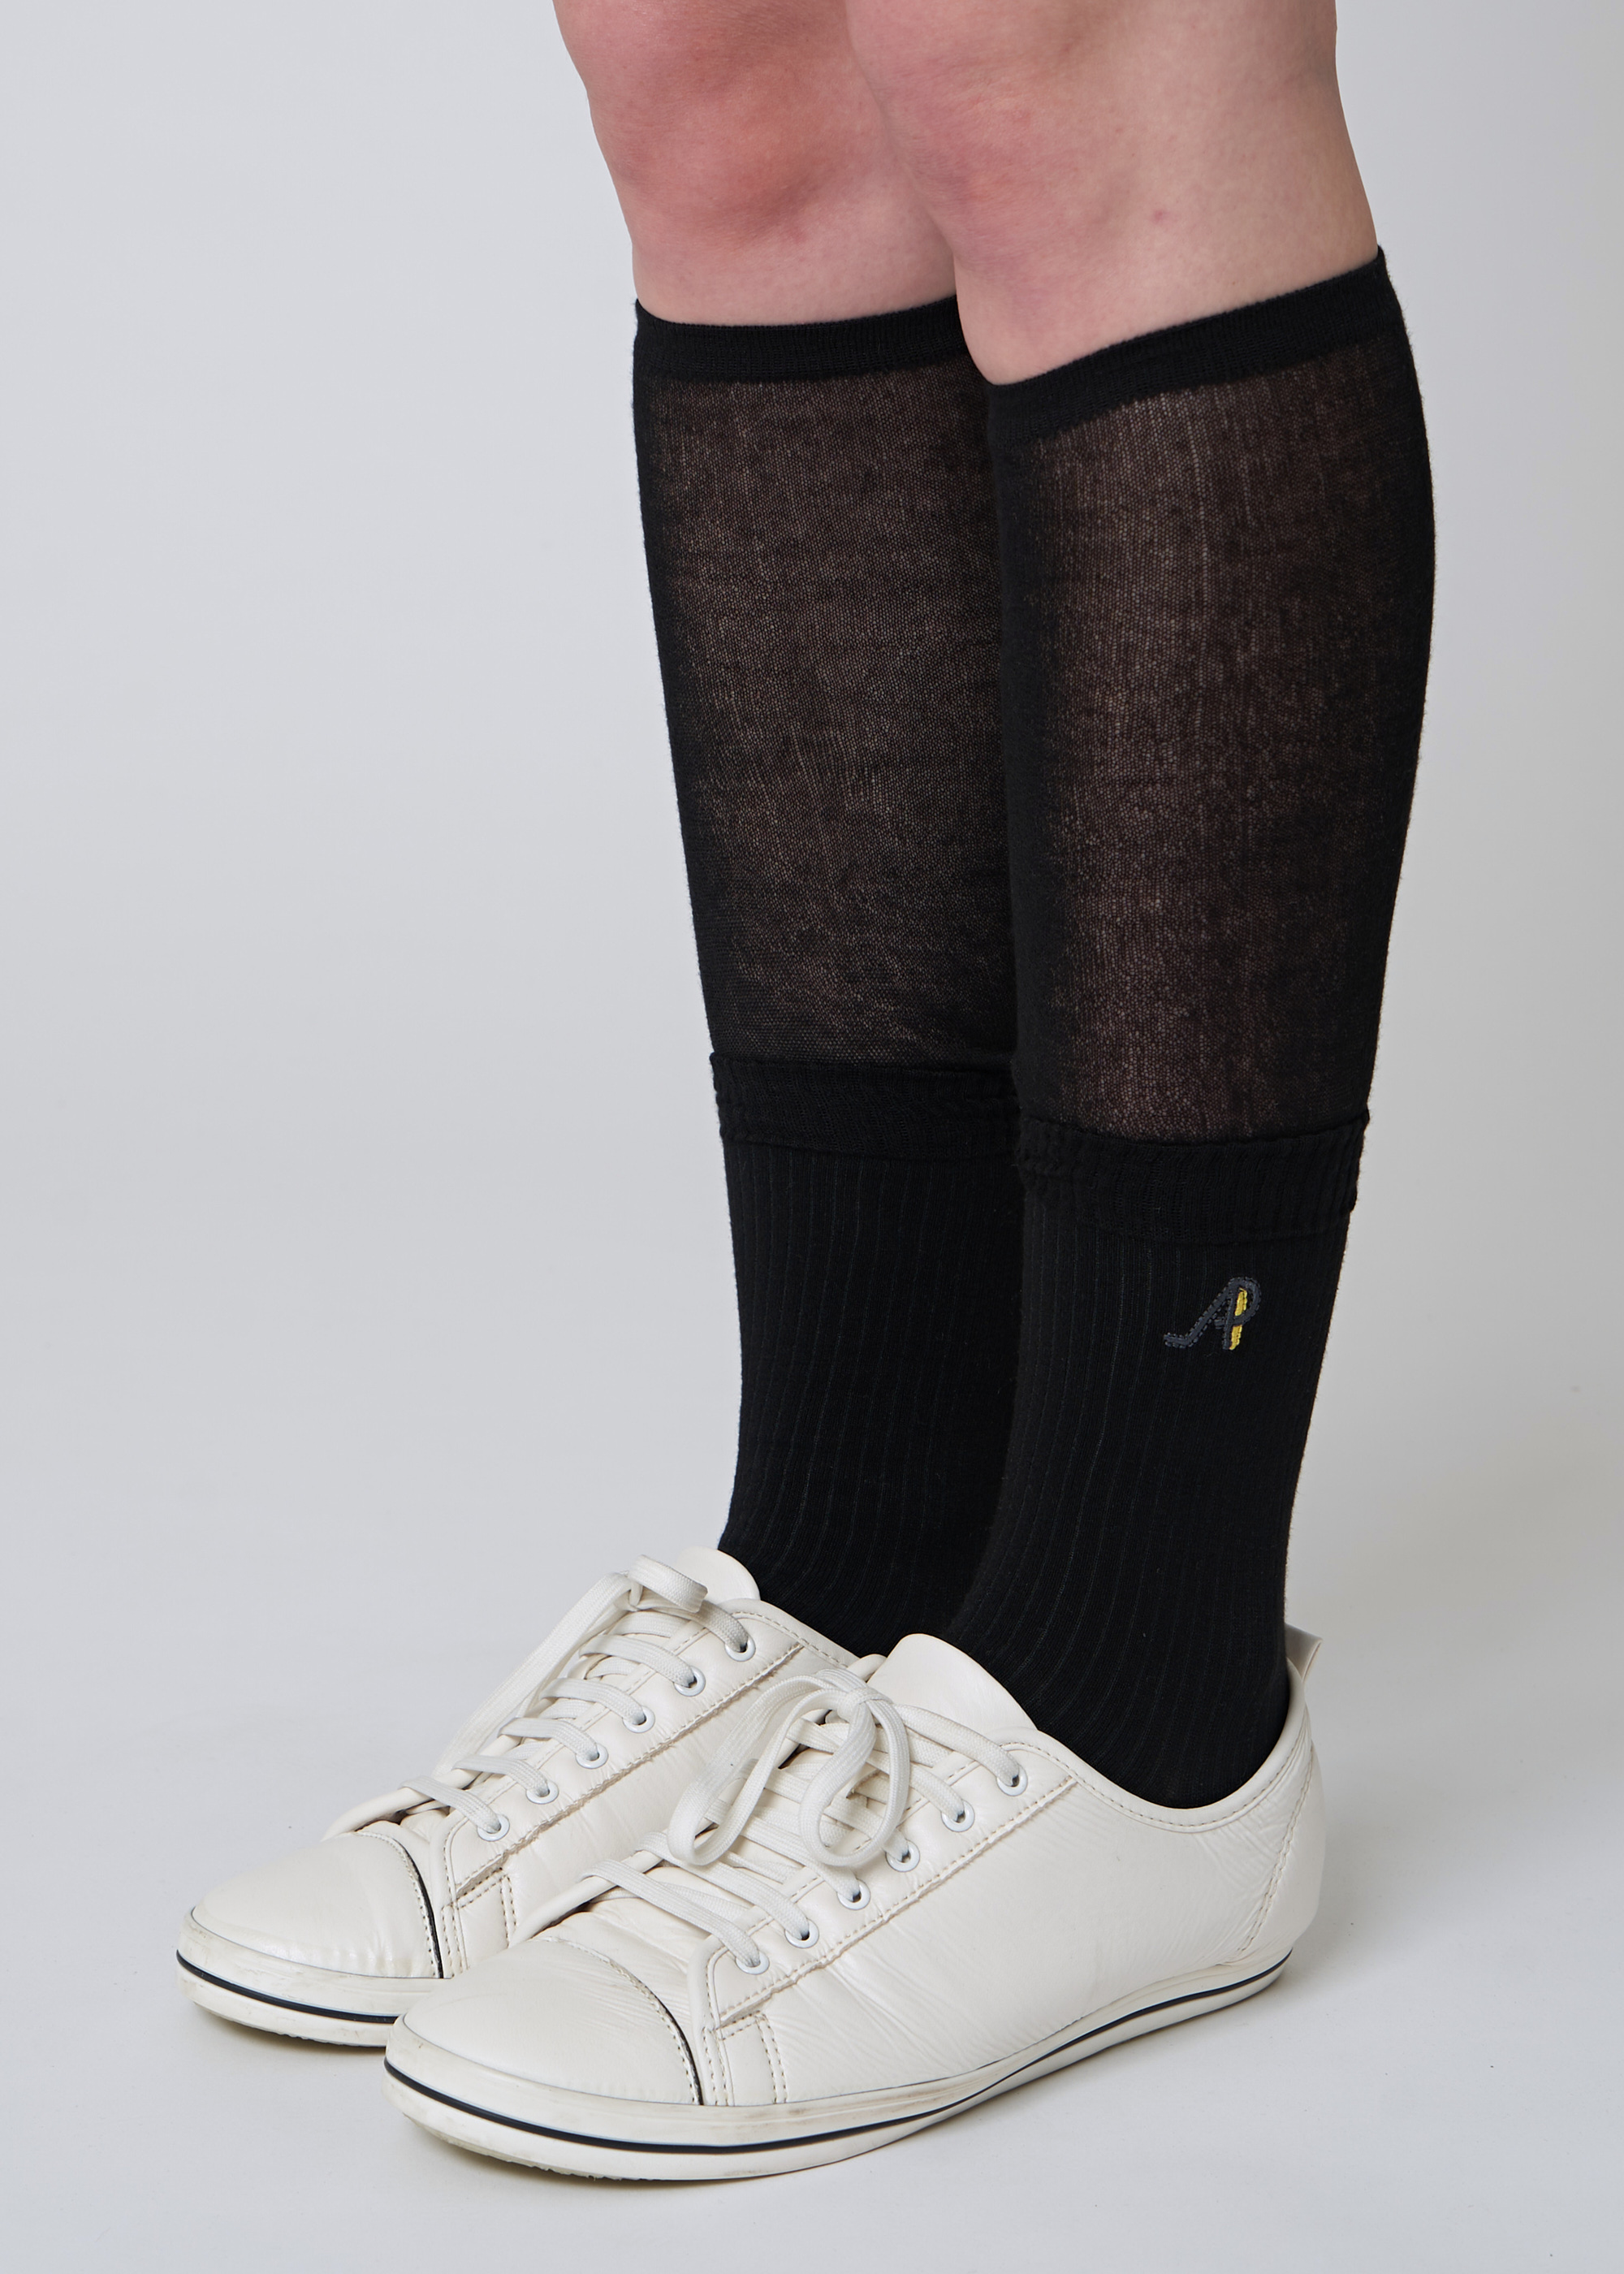 AW41AS02DOUBLE LAYER KNEE SOCKS_BLACK